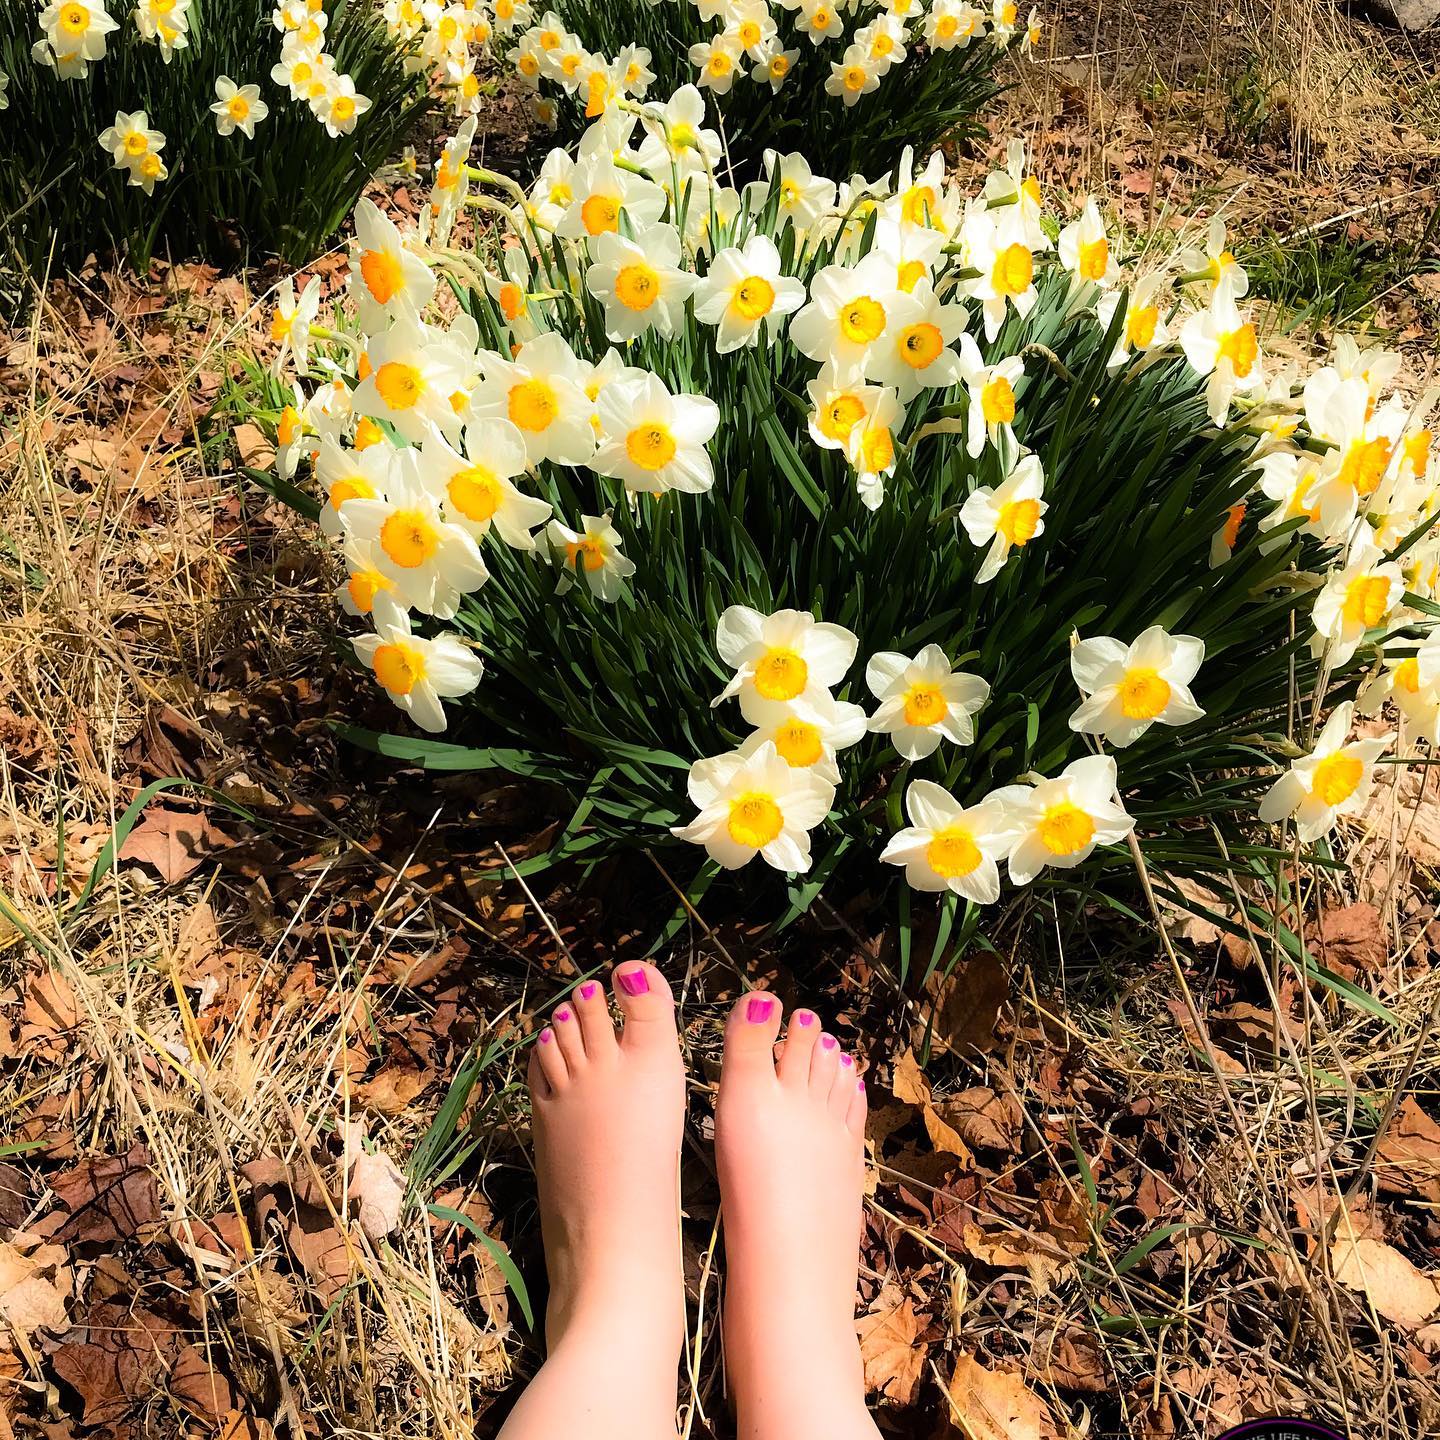 Miss Gracie Playing Footsies in the Flower Garden ... May 2020. #Miss #dominate #dømme #alternativestyle #feetfetishworld  #feetworship #toesfetish